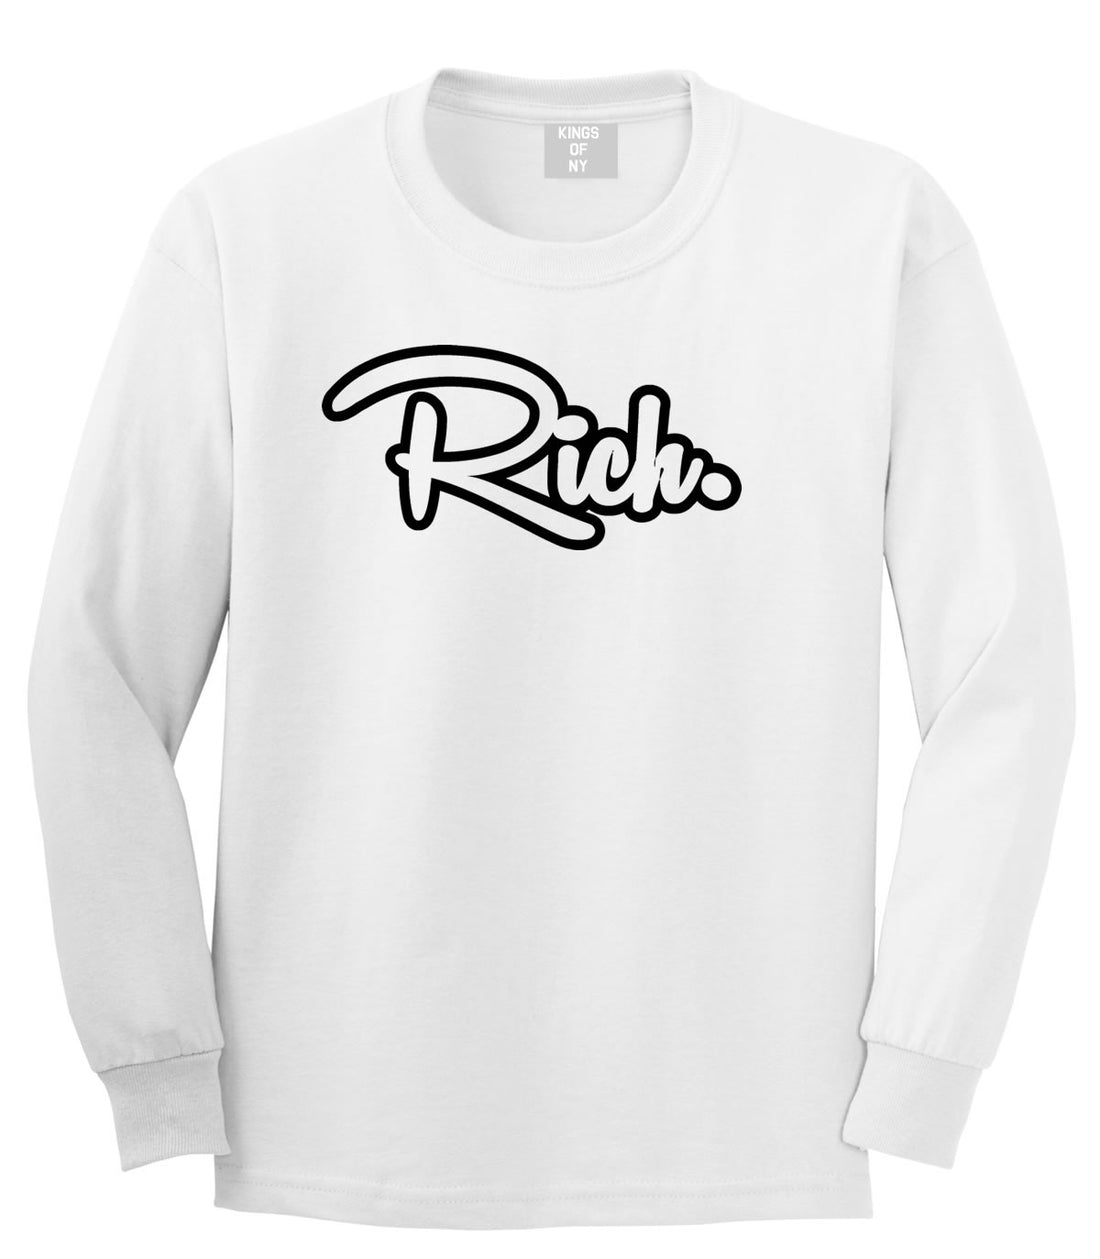 Rich Money Fab Style New York Richie NYC Long Sleeve Boys Kids T-Shirt in White by Kings Of NY